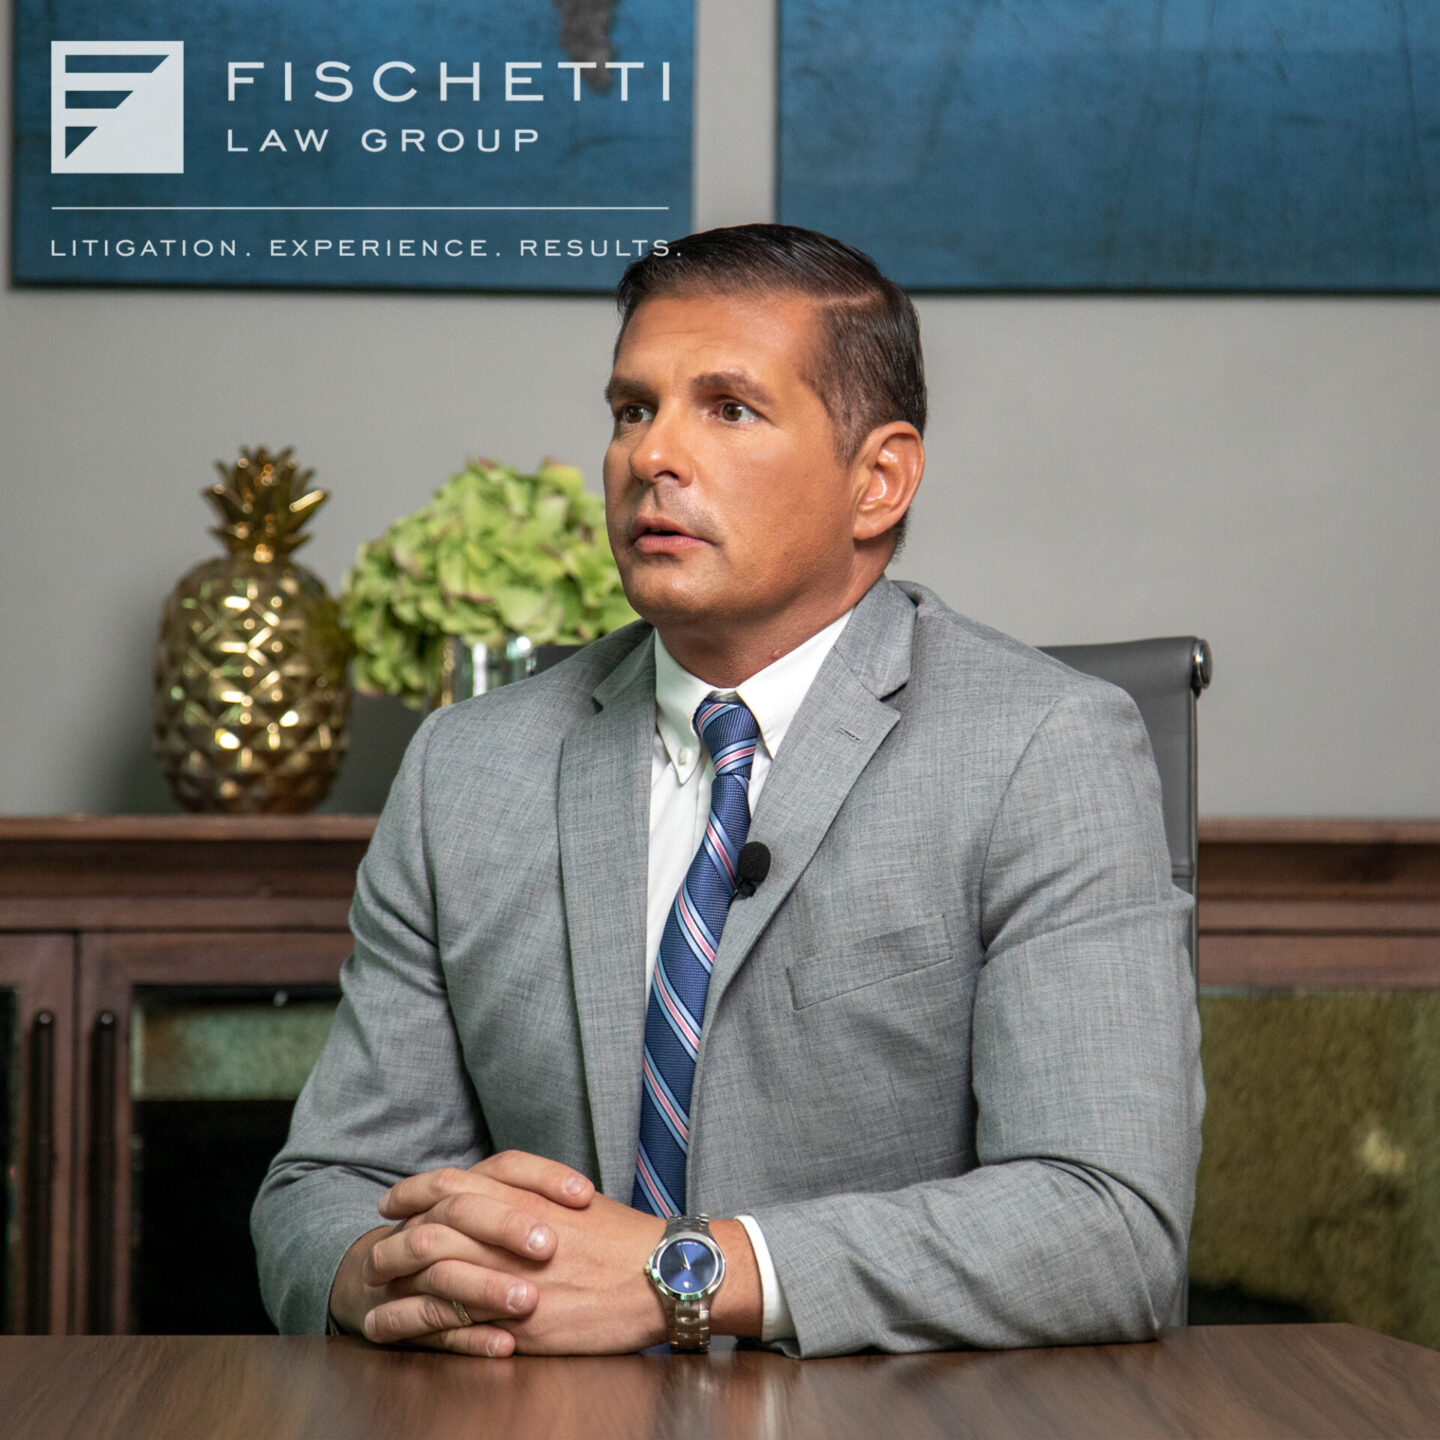 pip collections lawyer michael fischetti - fischetti law group - pip collections lawyer hialeah - best pip lawyer hialeah